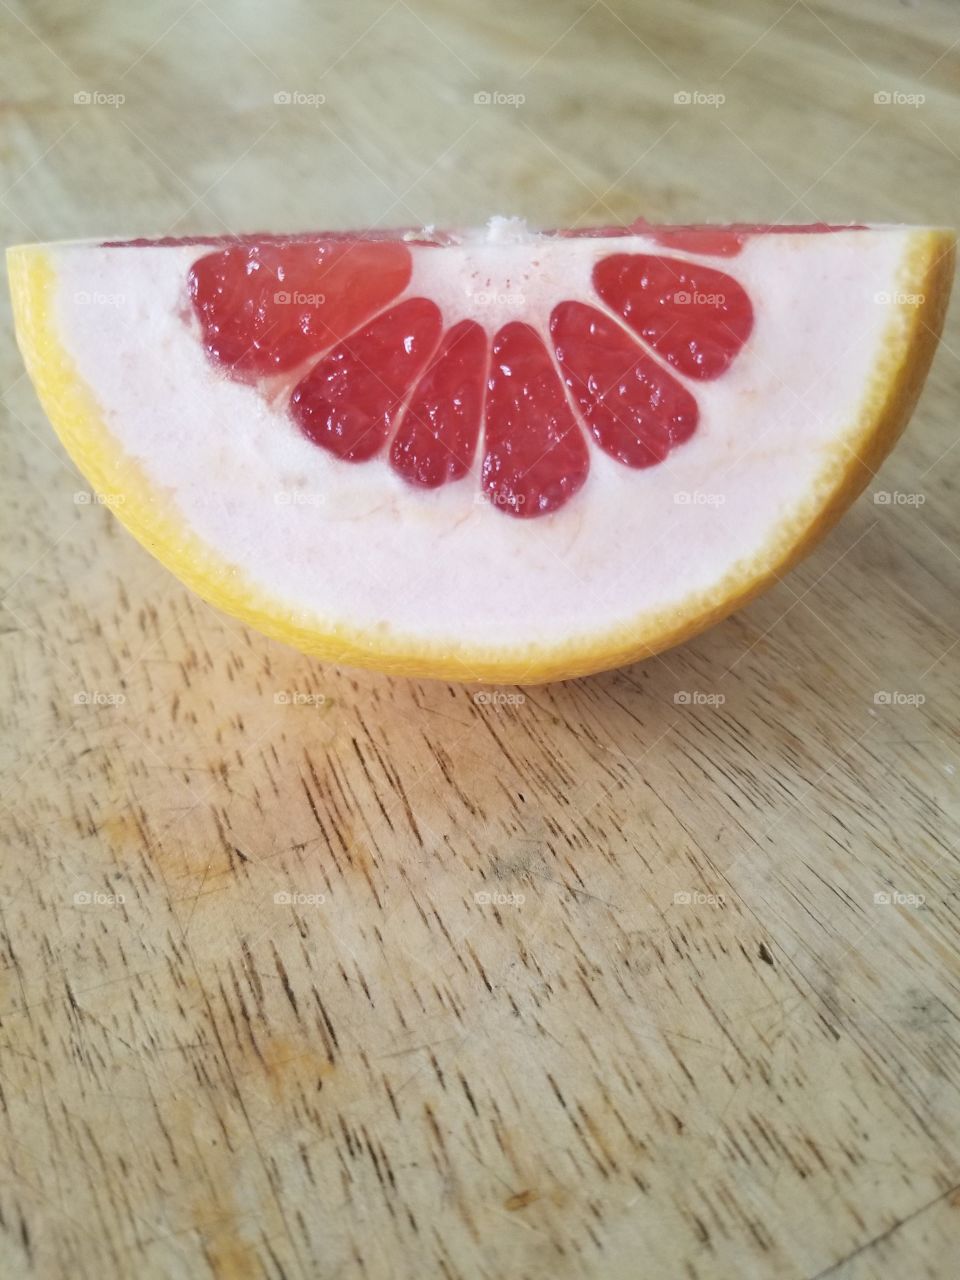 The Color of Grapefruit